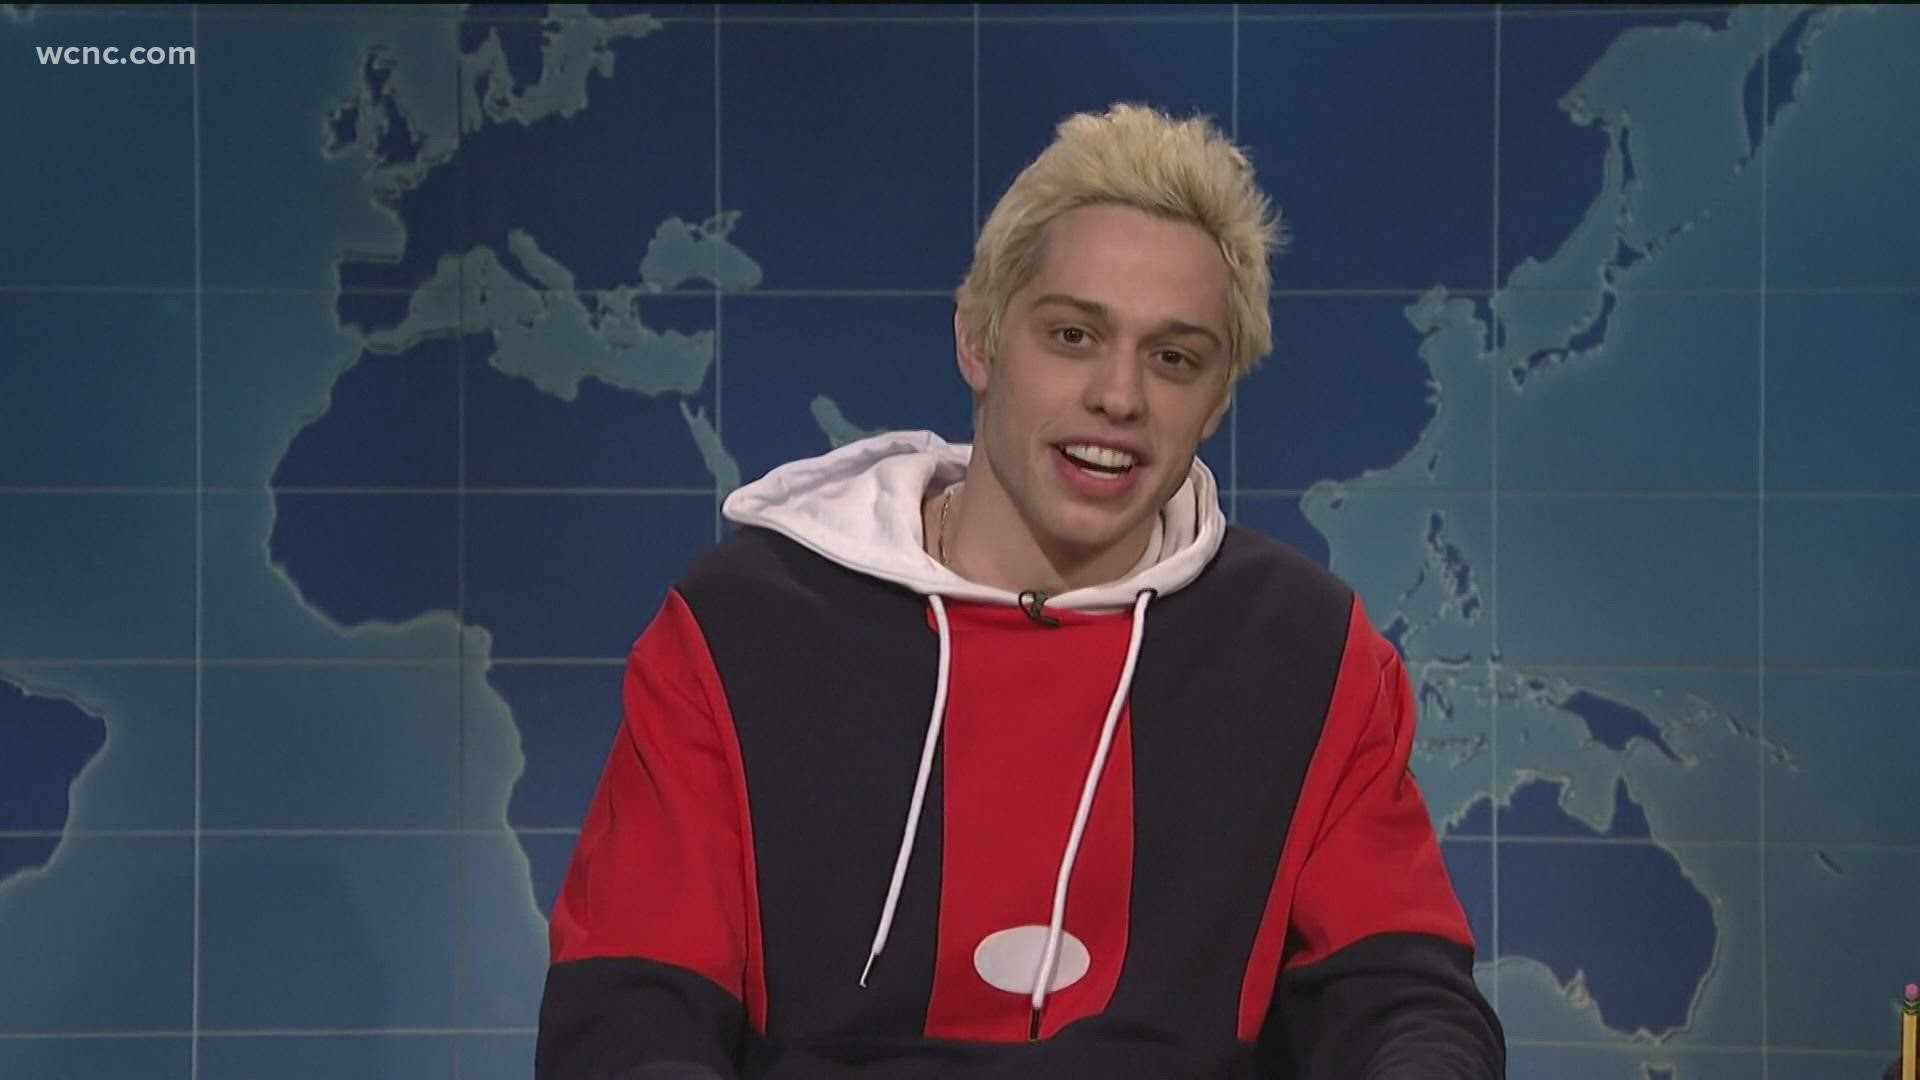 Pete Davidson going space, The Dead will soon wrap | Entertainment | 11alive.com